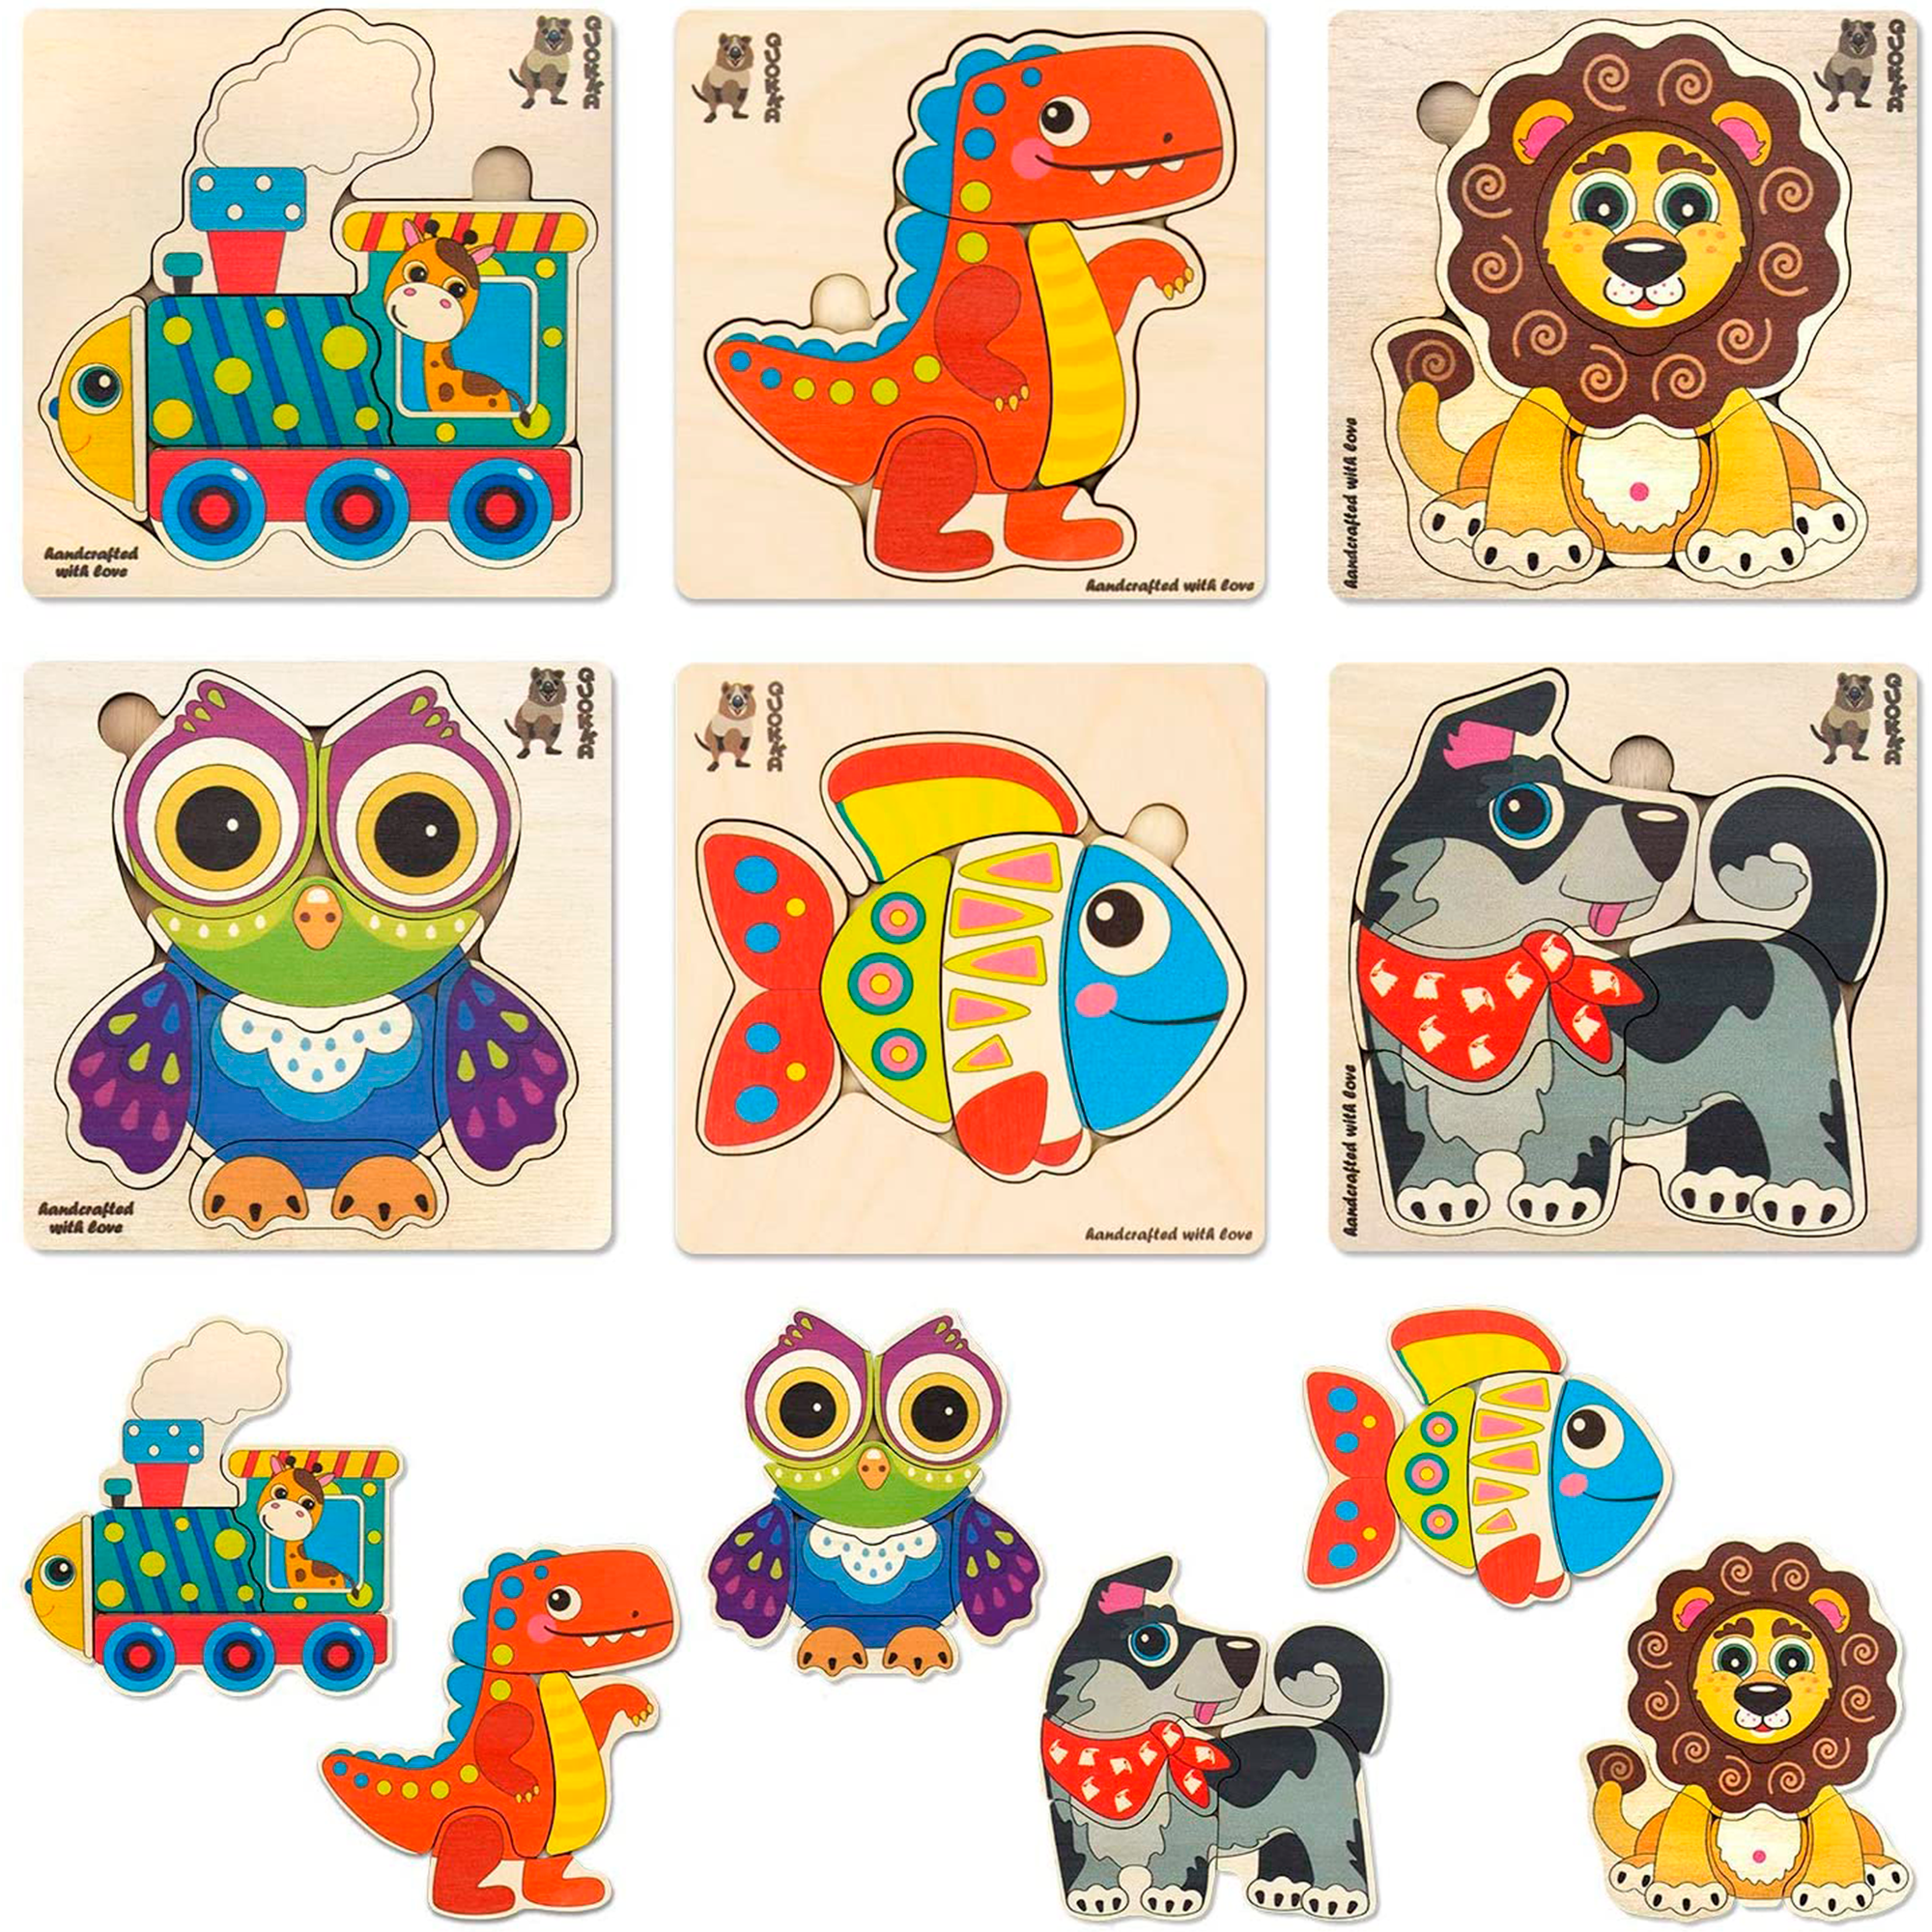 KIDS CHILDREN TODDLERS PUZZLES GAME ANIMAL SHAPE EDUCATIONAL TOYS 